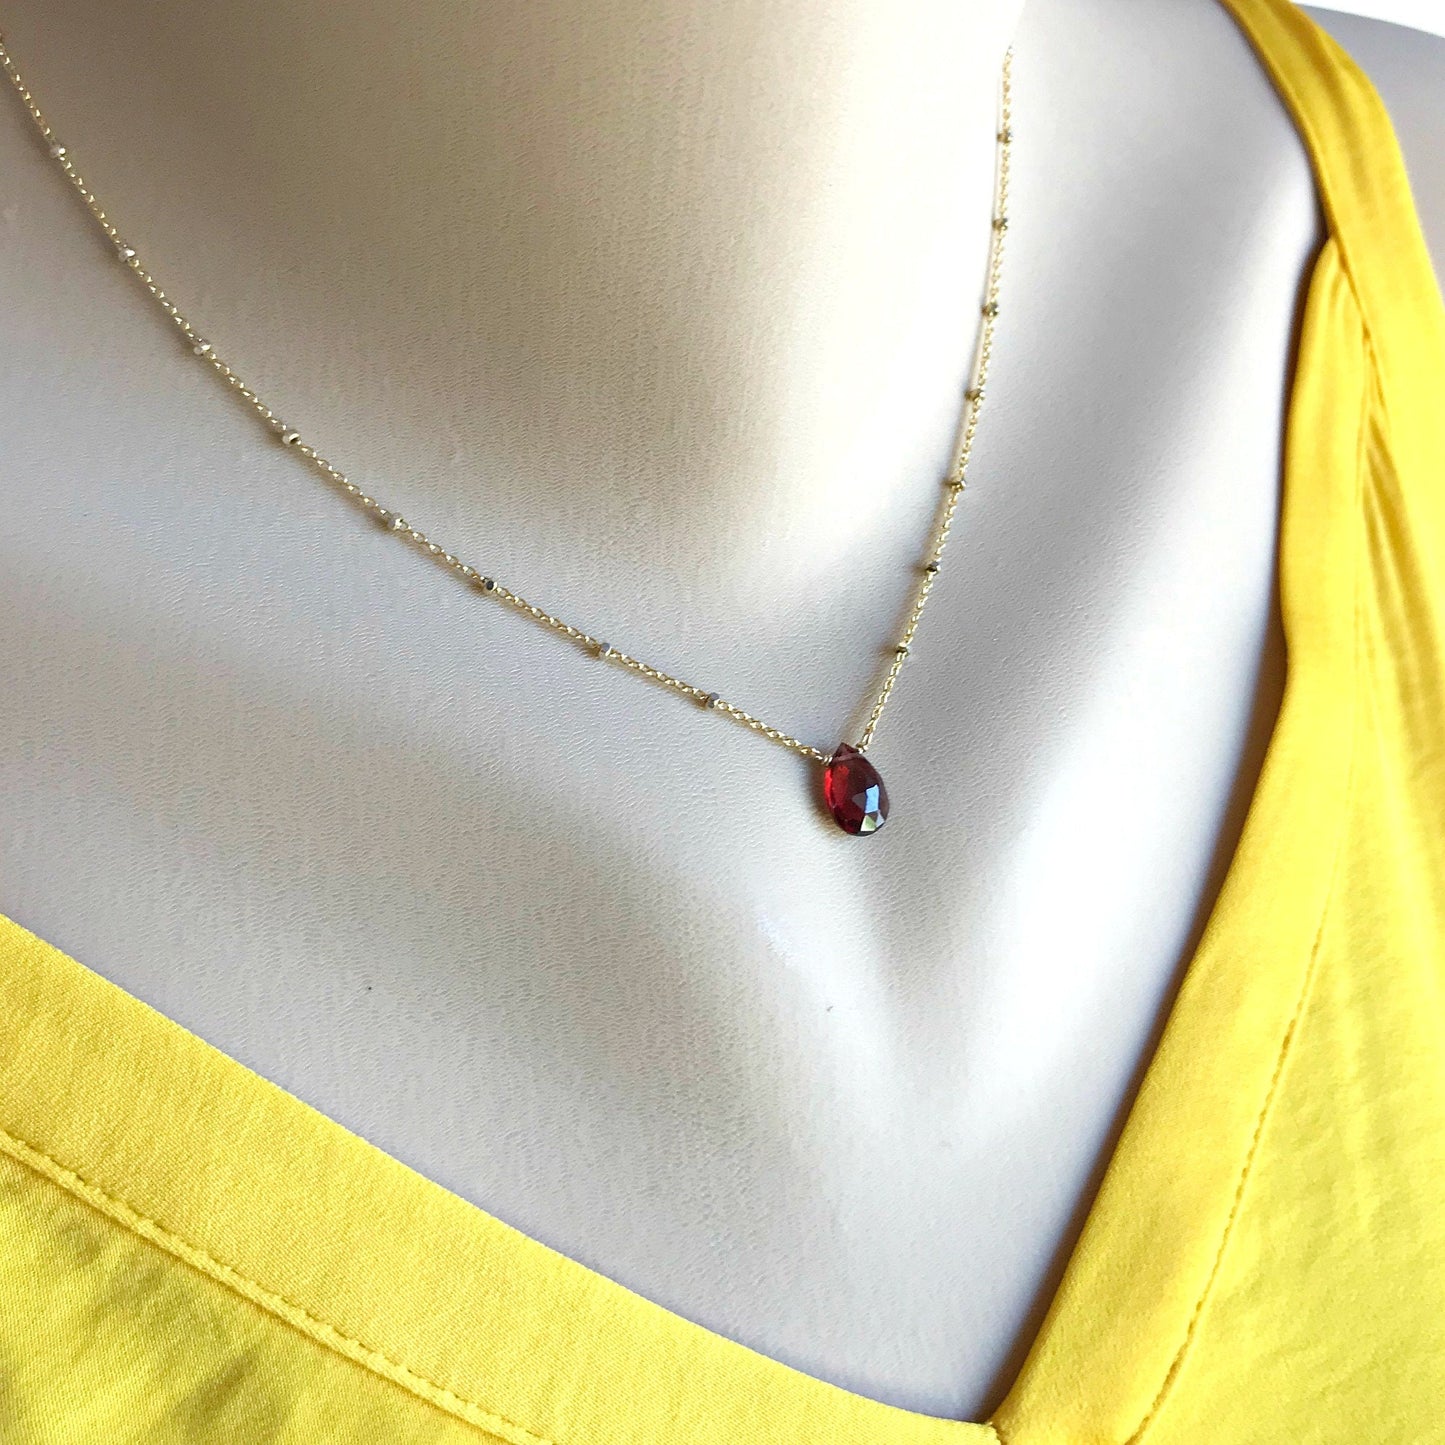 Delicate Garnet Necklace January Birthstone Layering Necklace January Birthday Gift Genuine Gemstone Jewelry,Healing Crystal,Valentine's Day